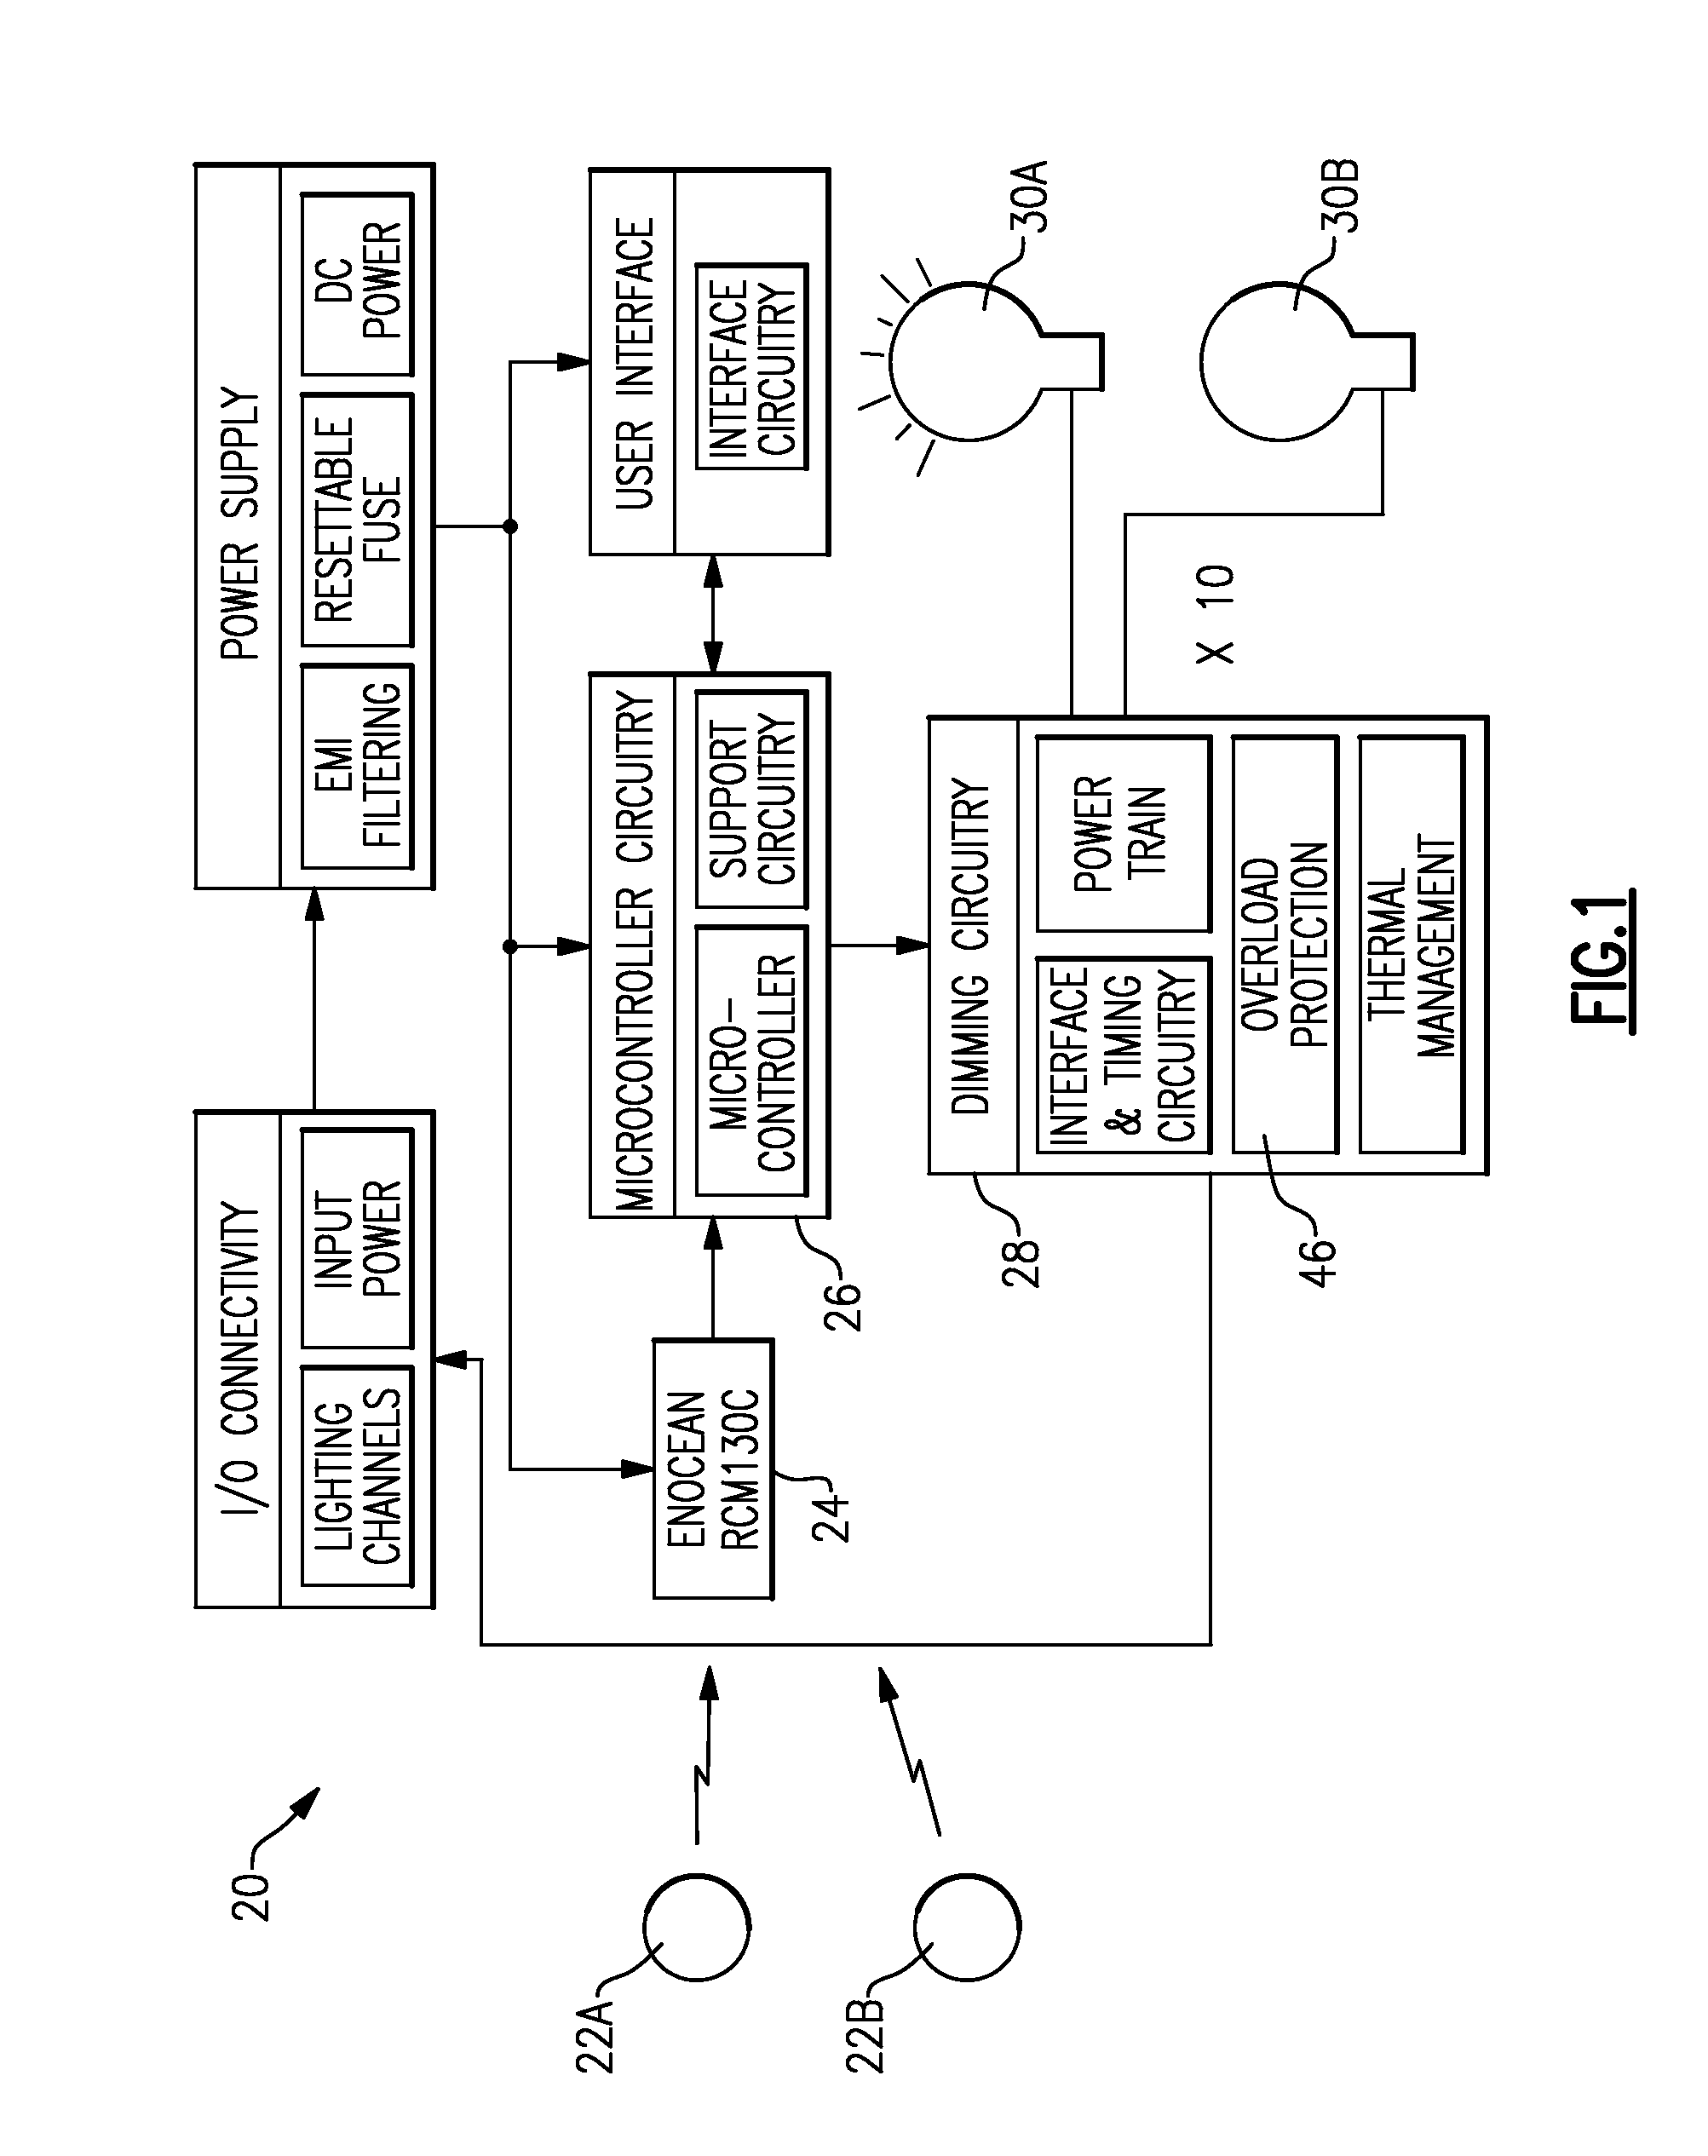 Inductive load sensor for dimmer circuit